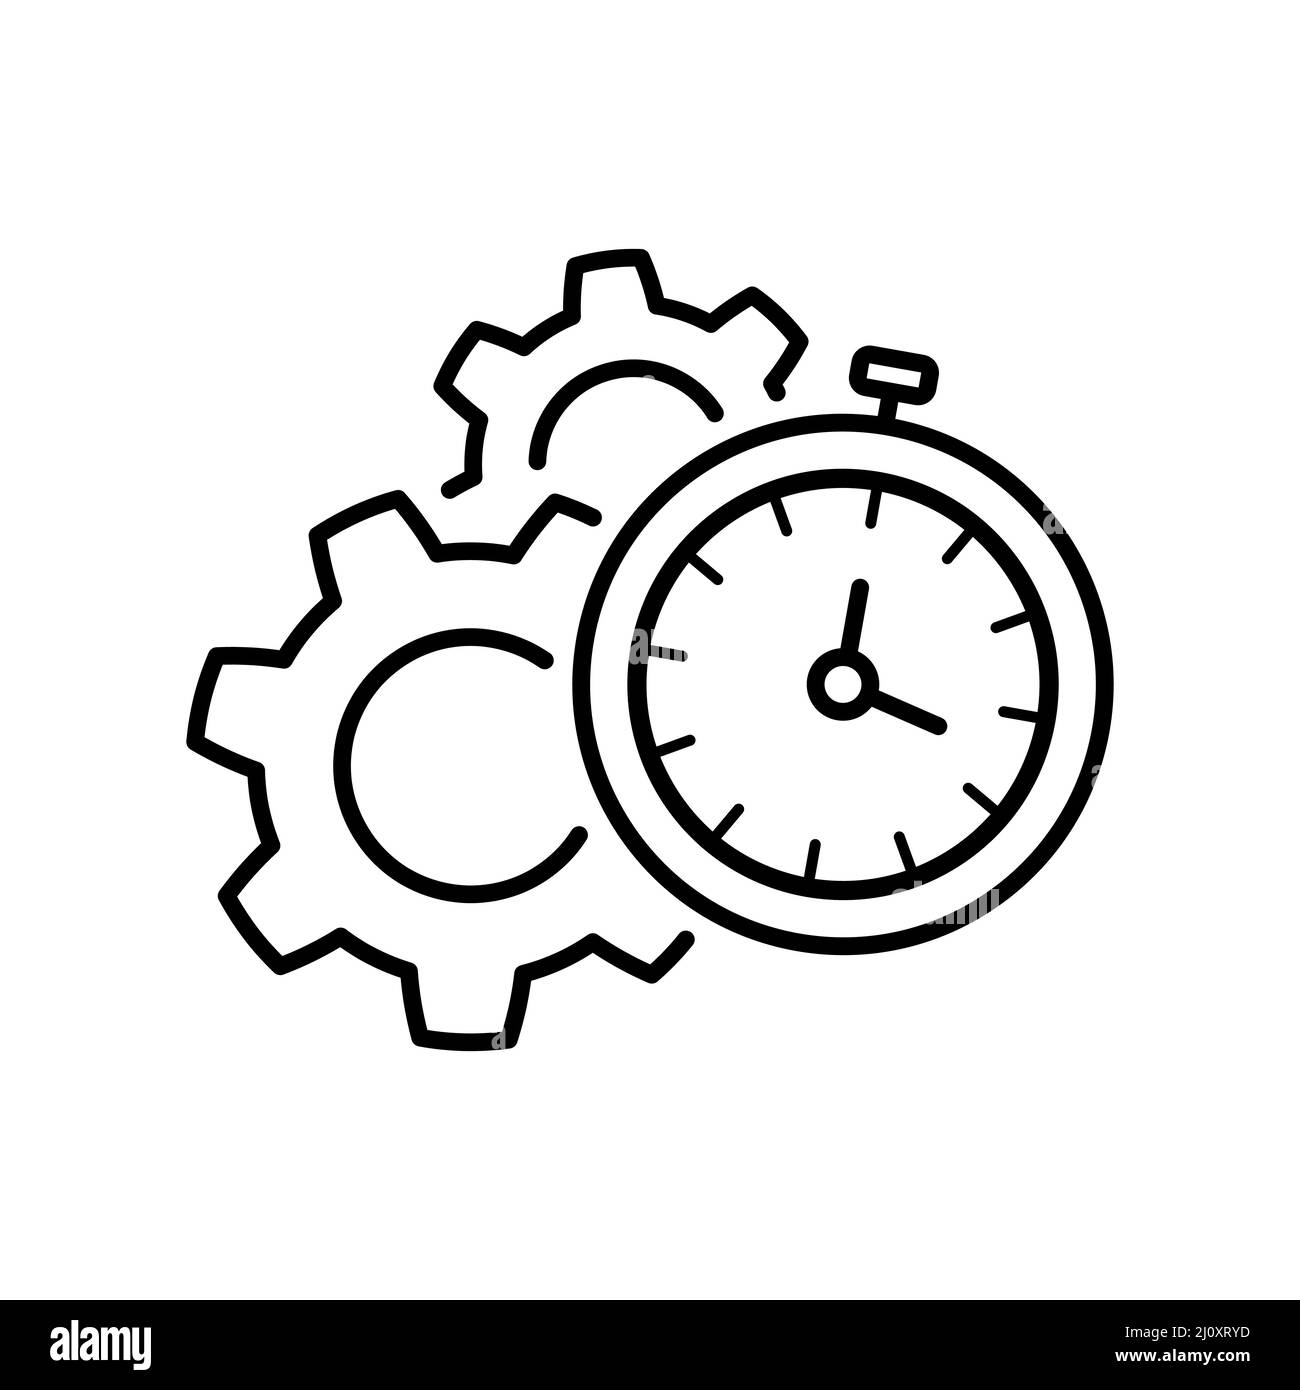 Efficiency ico in flat style. Clock outline symbol. Sign of the rapid passage of time isolated on white background. Process sign. Simple time icon in Stock Vector